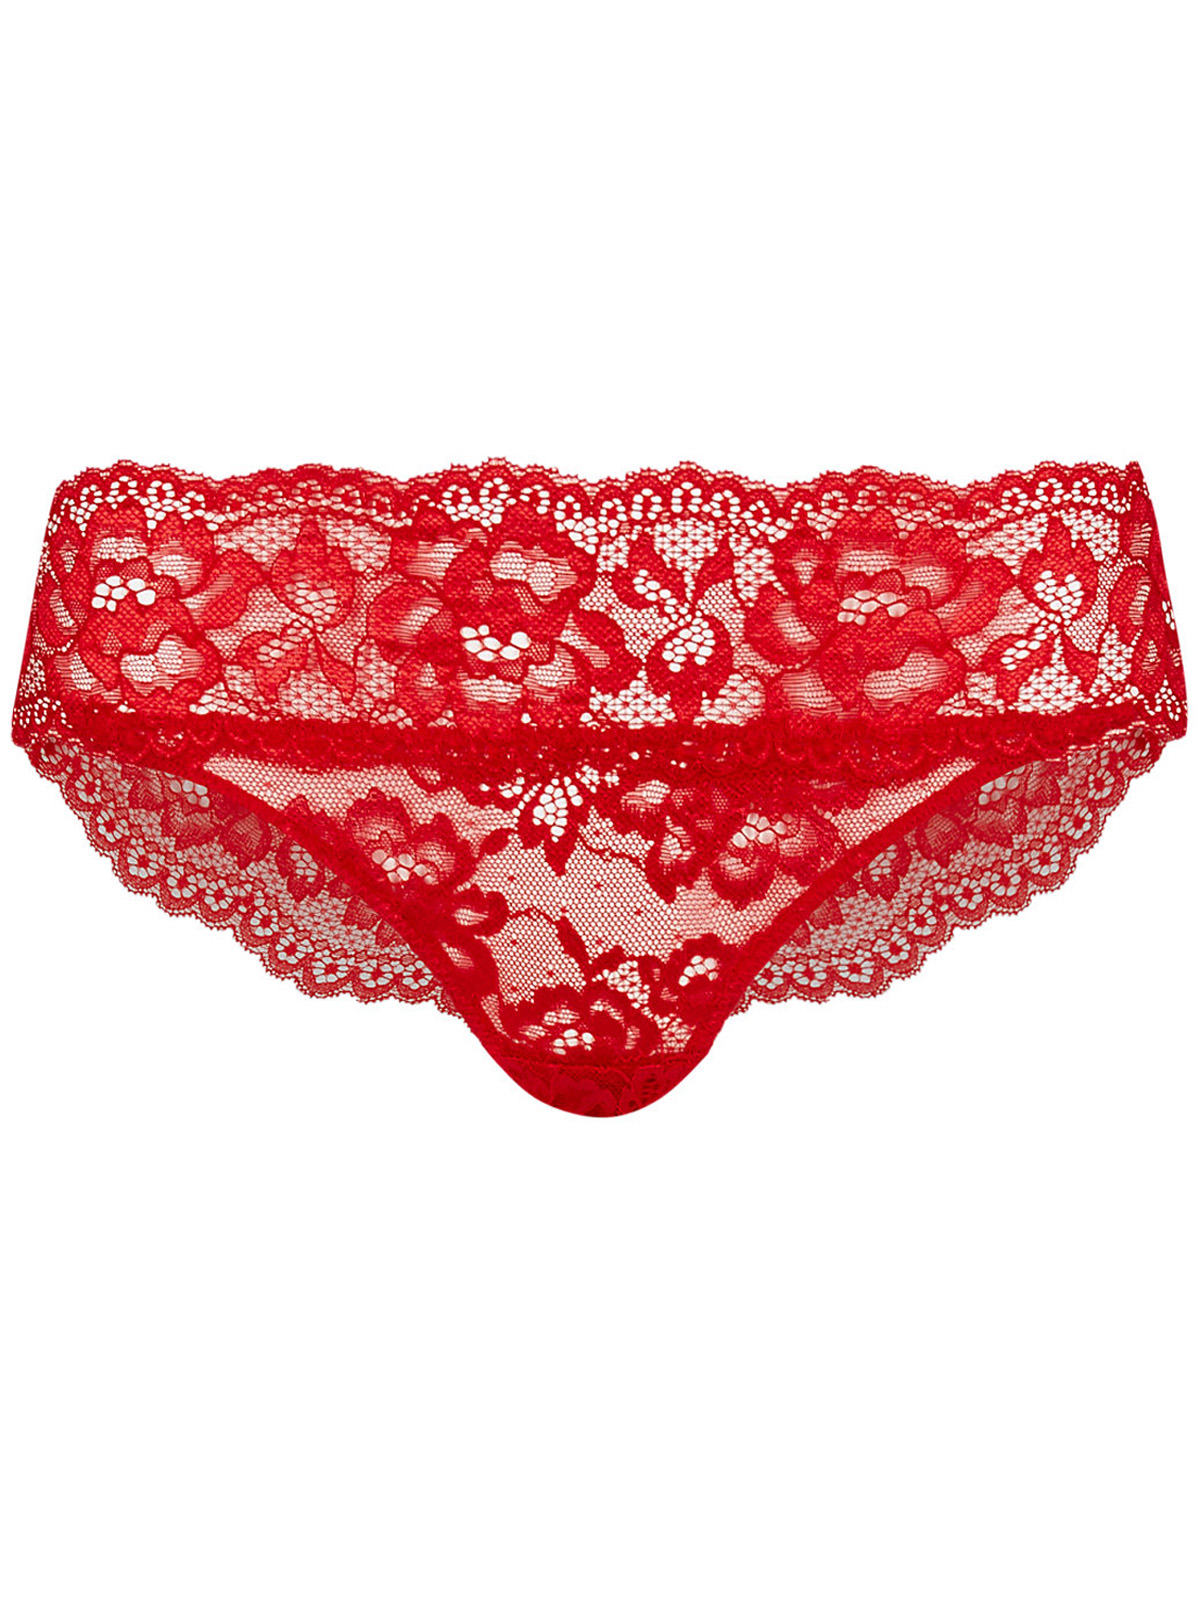 Marks and Spencer - - M&5 ROUGE Lace Brazilian Knickers - Size 6 to 16